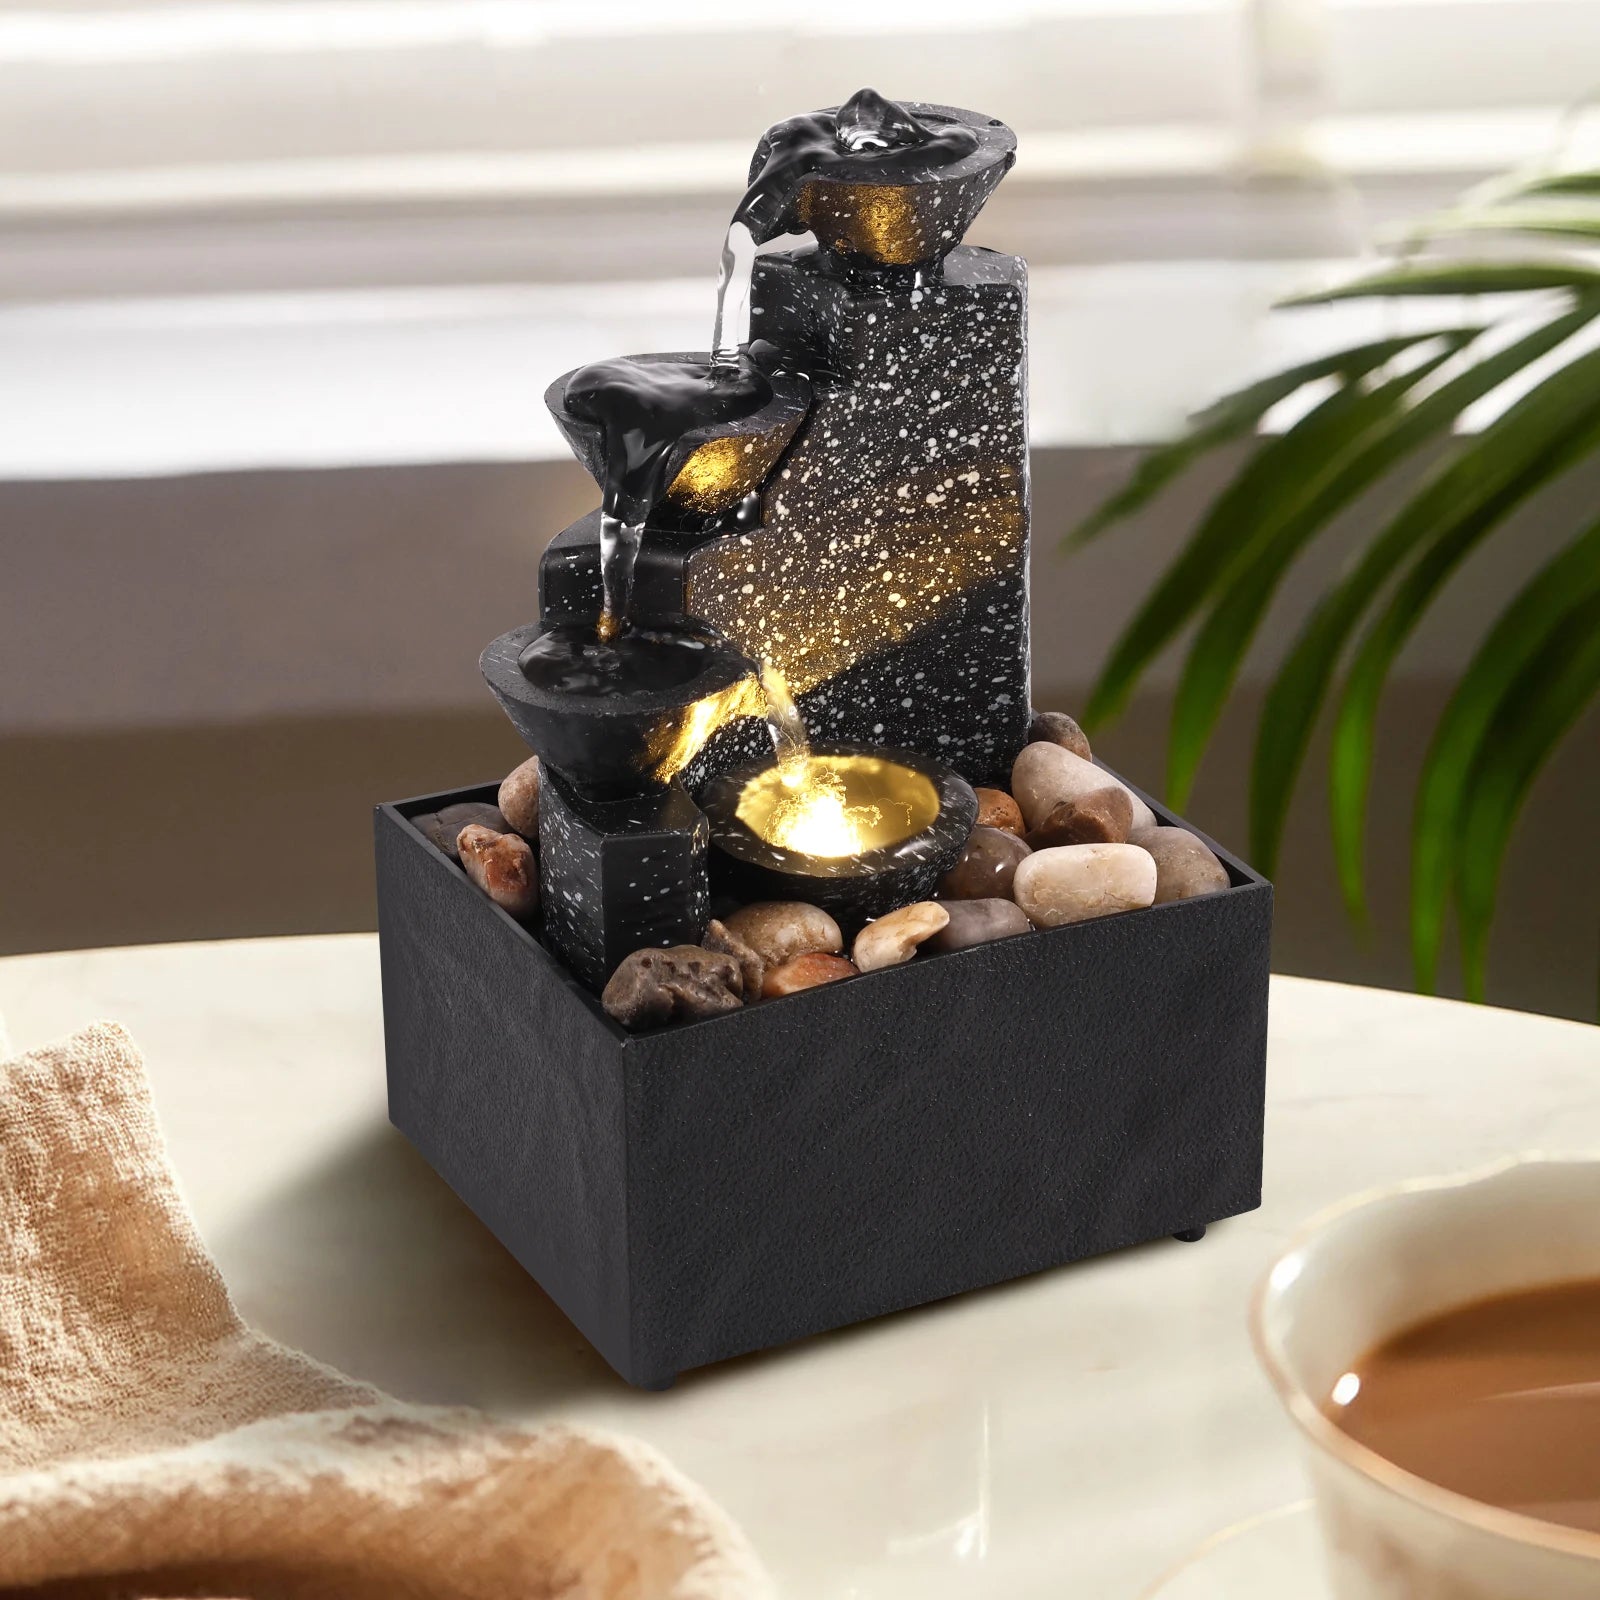 Creative Desktop Waterfall Ornament for Home and Office Decor